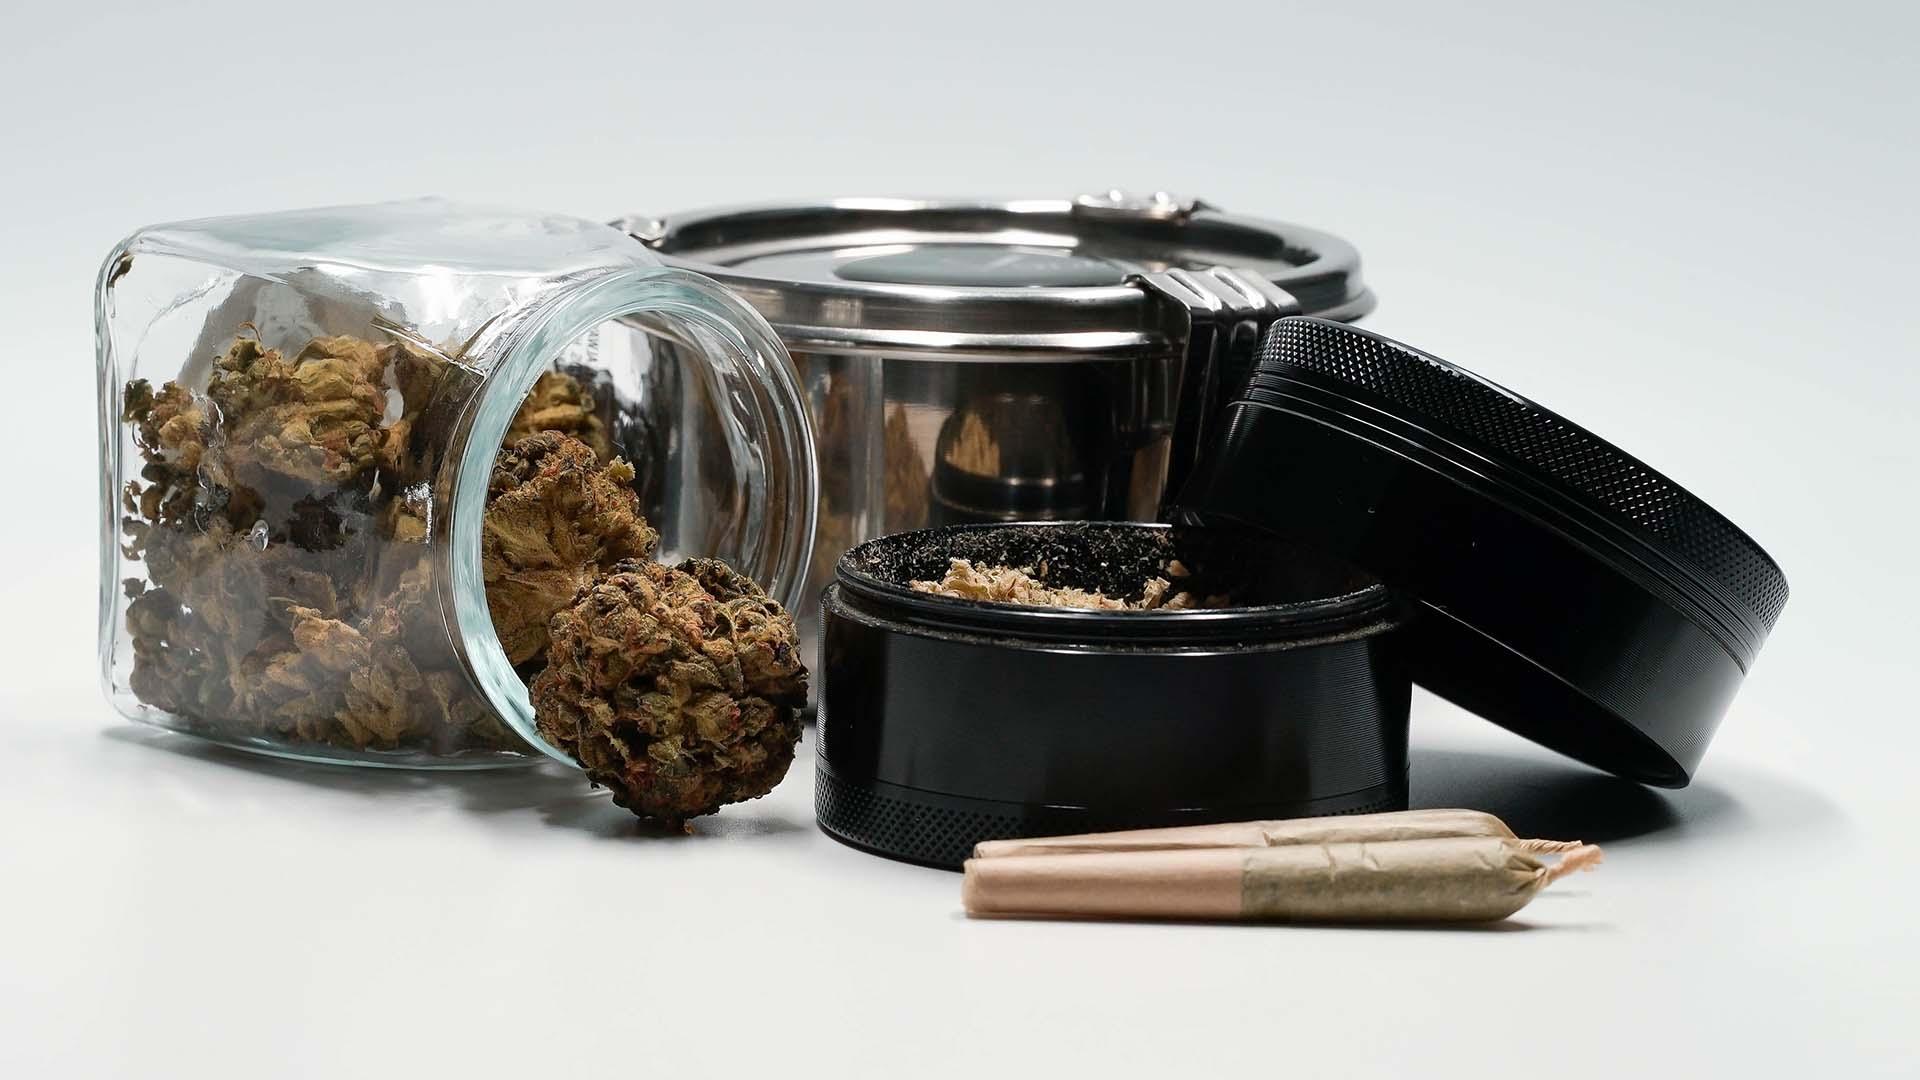 A variety of cannabis products.